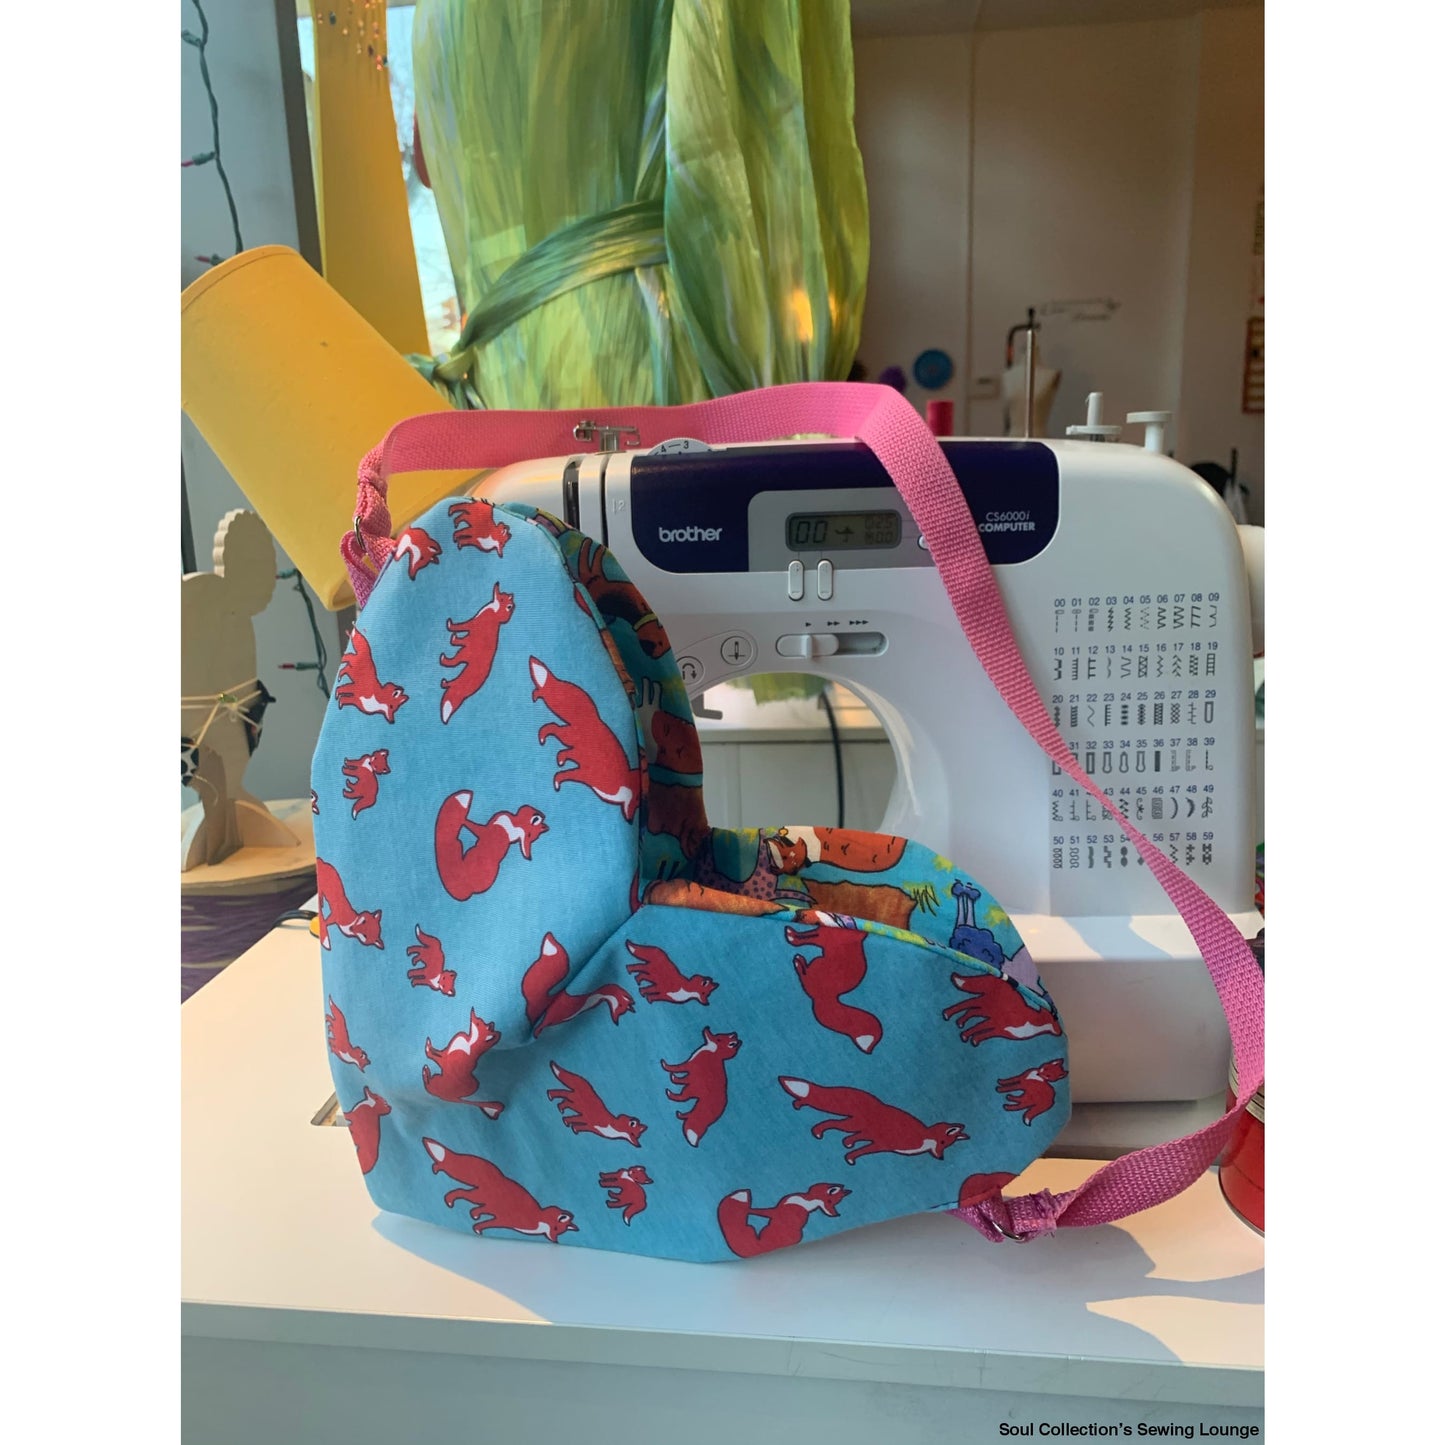 Afterschool In Shop Sewing Classes - Jan 19th, Wednesday - Kids Sewing Classes